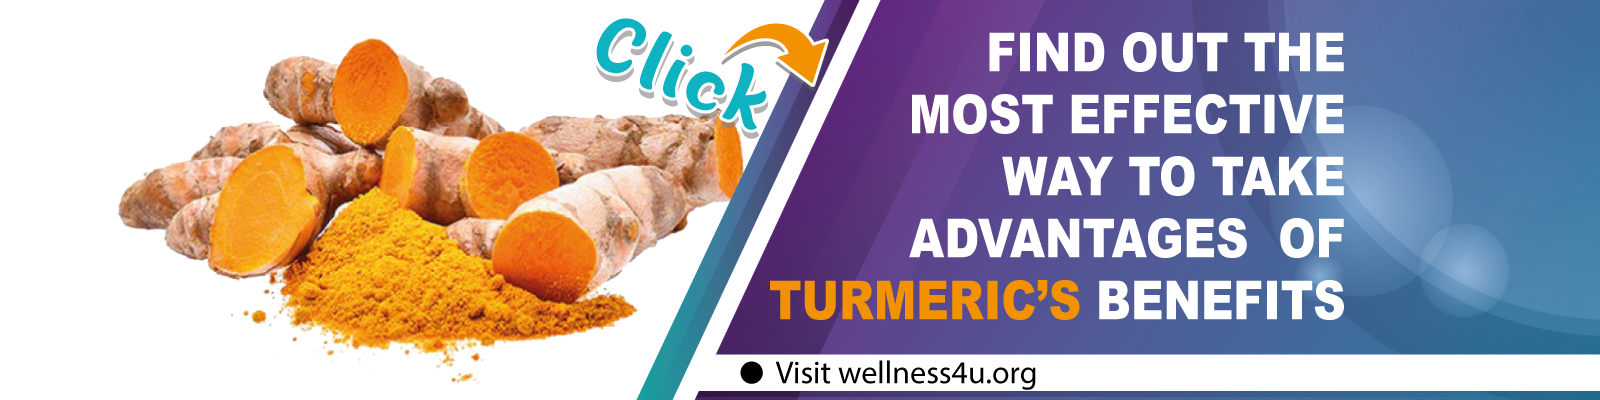 Find out the most effective way to take advantages of turmeric's benefits